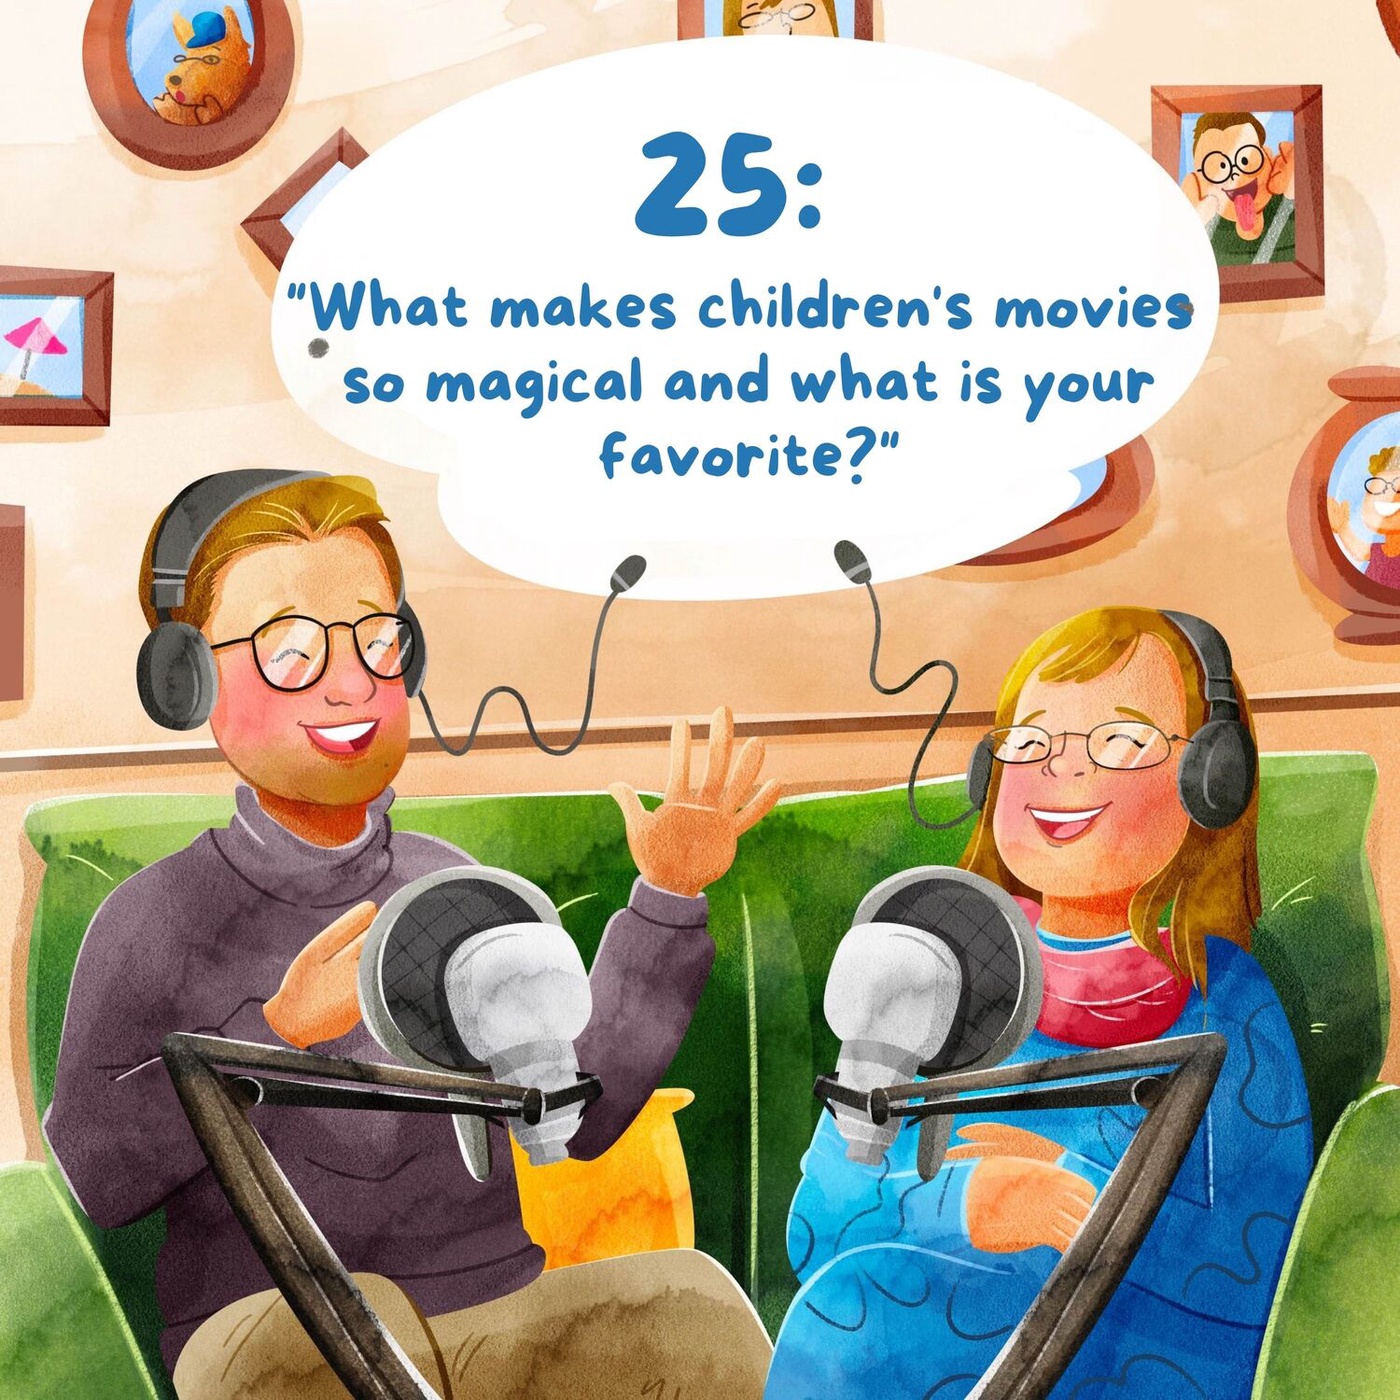 What makes children's movies so magical? - Children and books